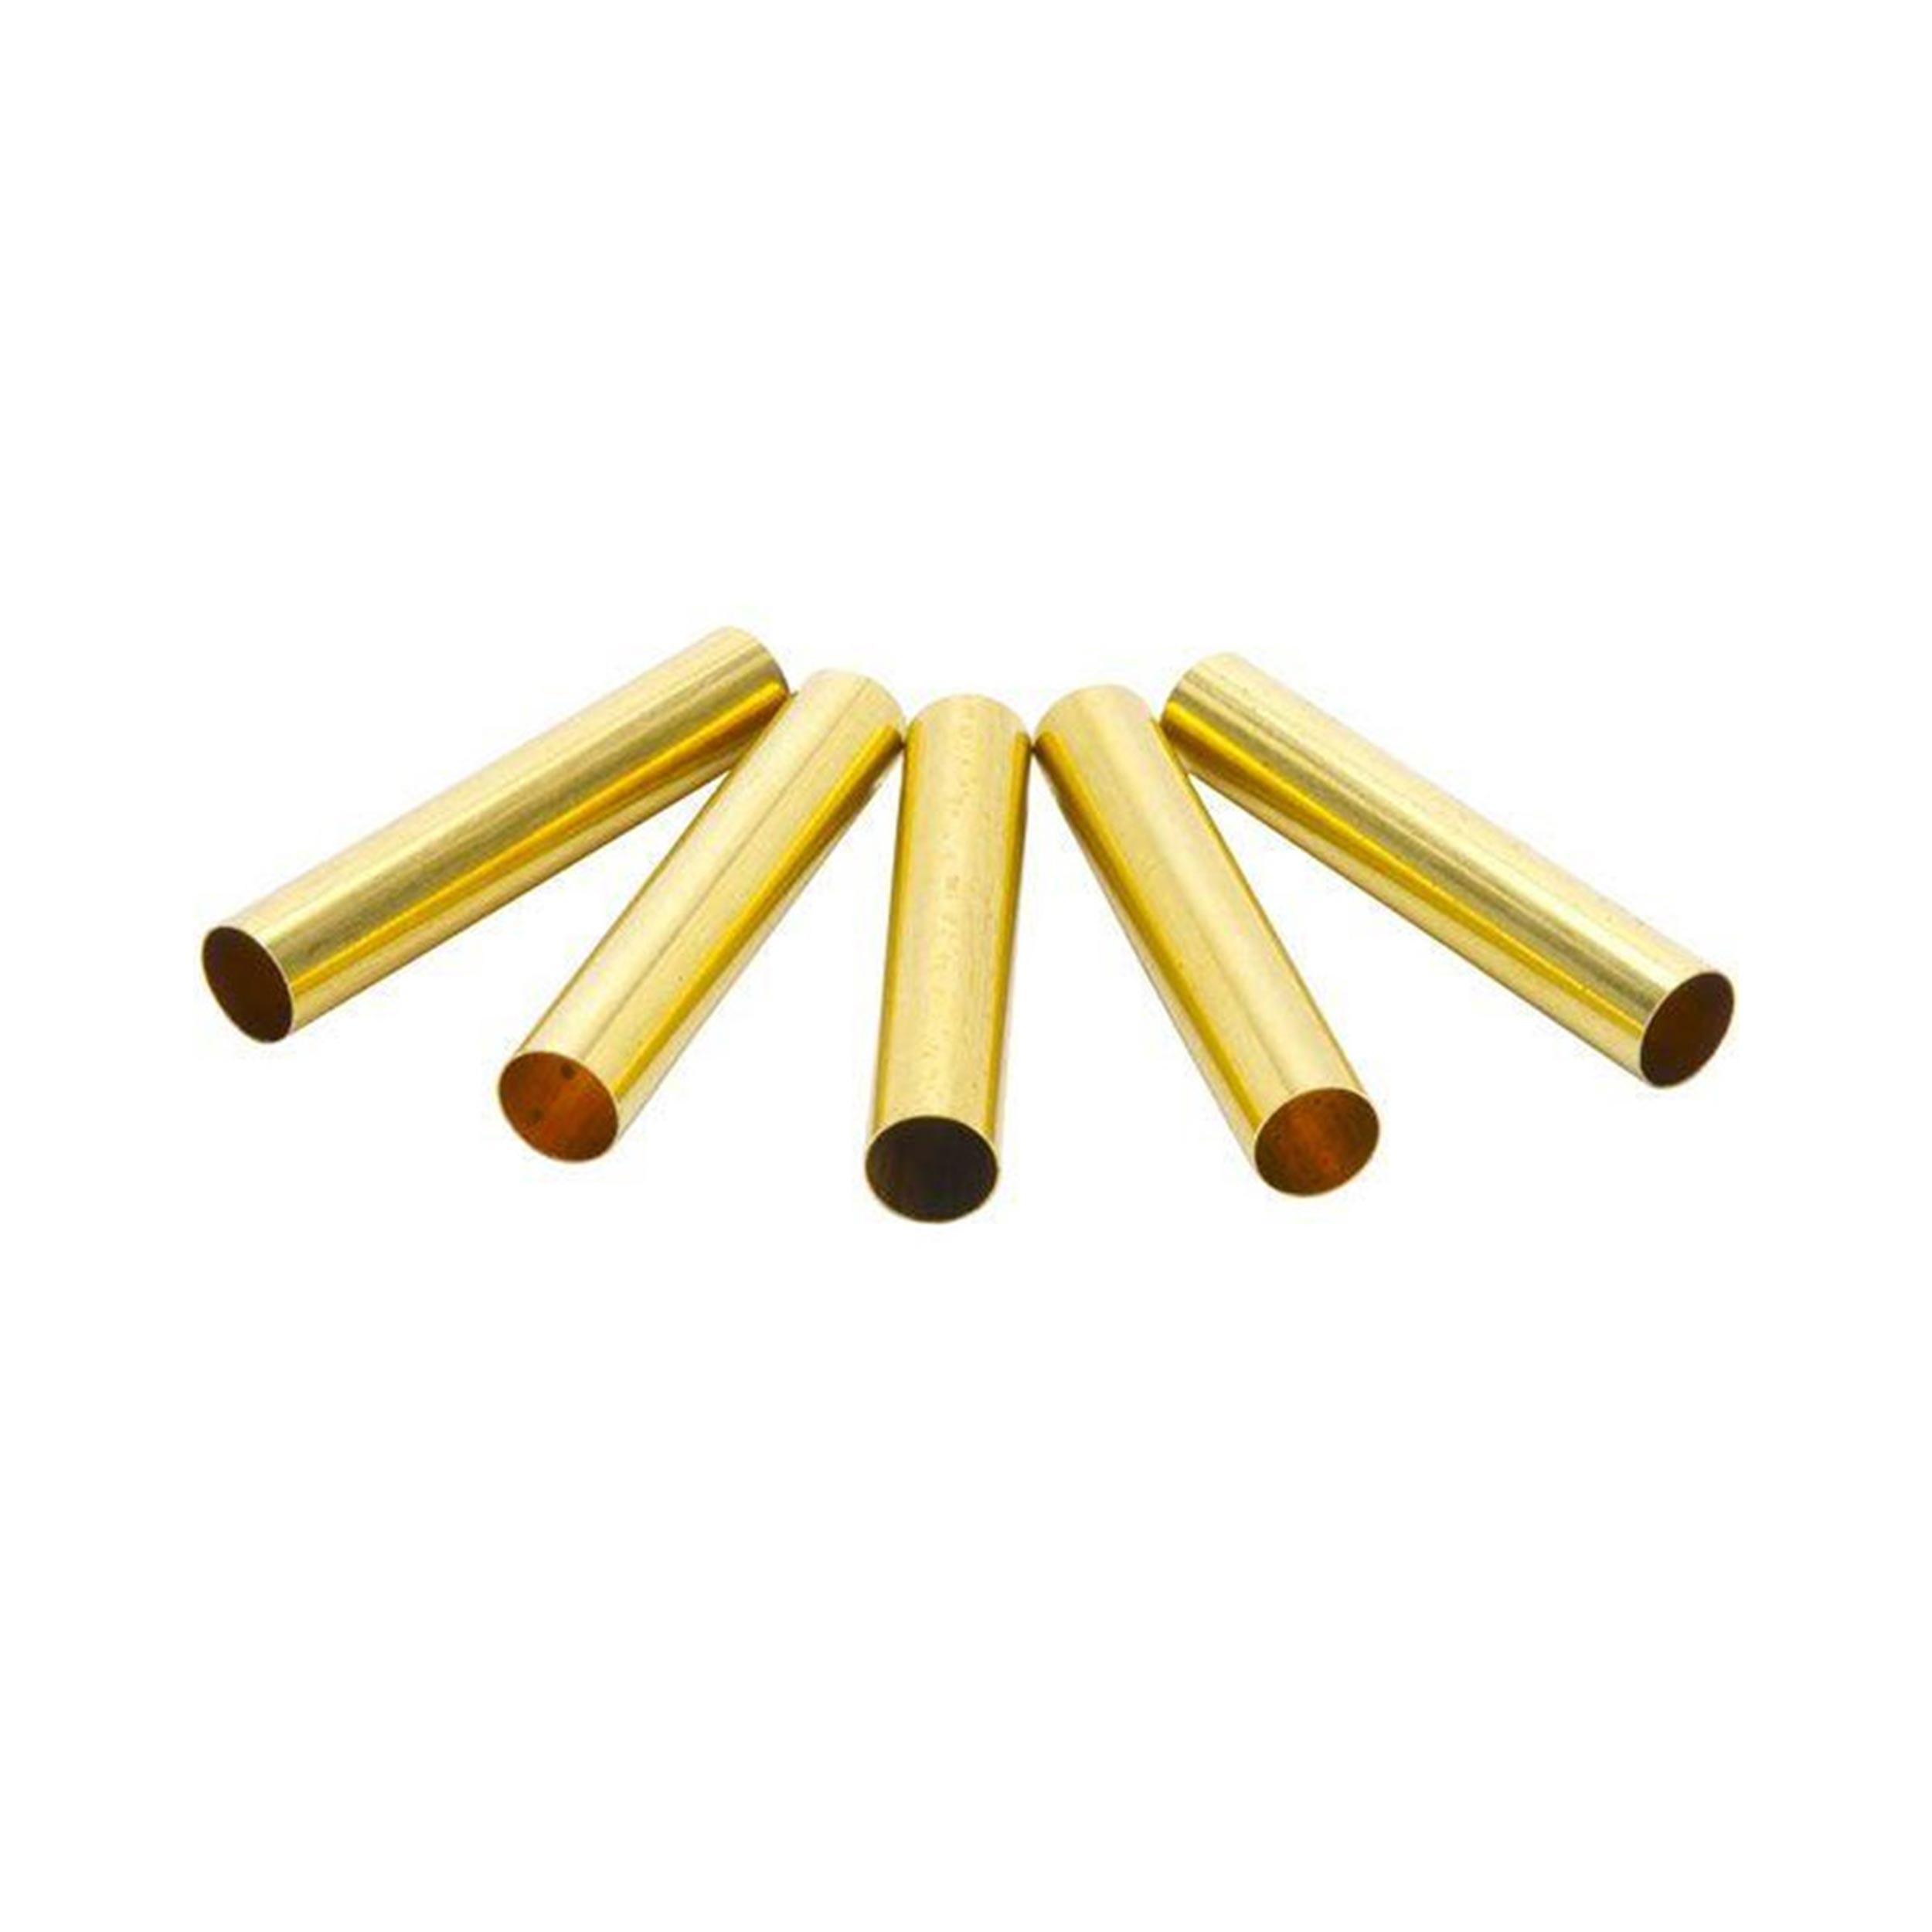 Replacement Brass Tubes For Cirque Twist Ballpoint Pen Kits